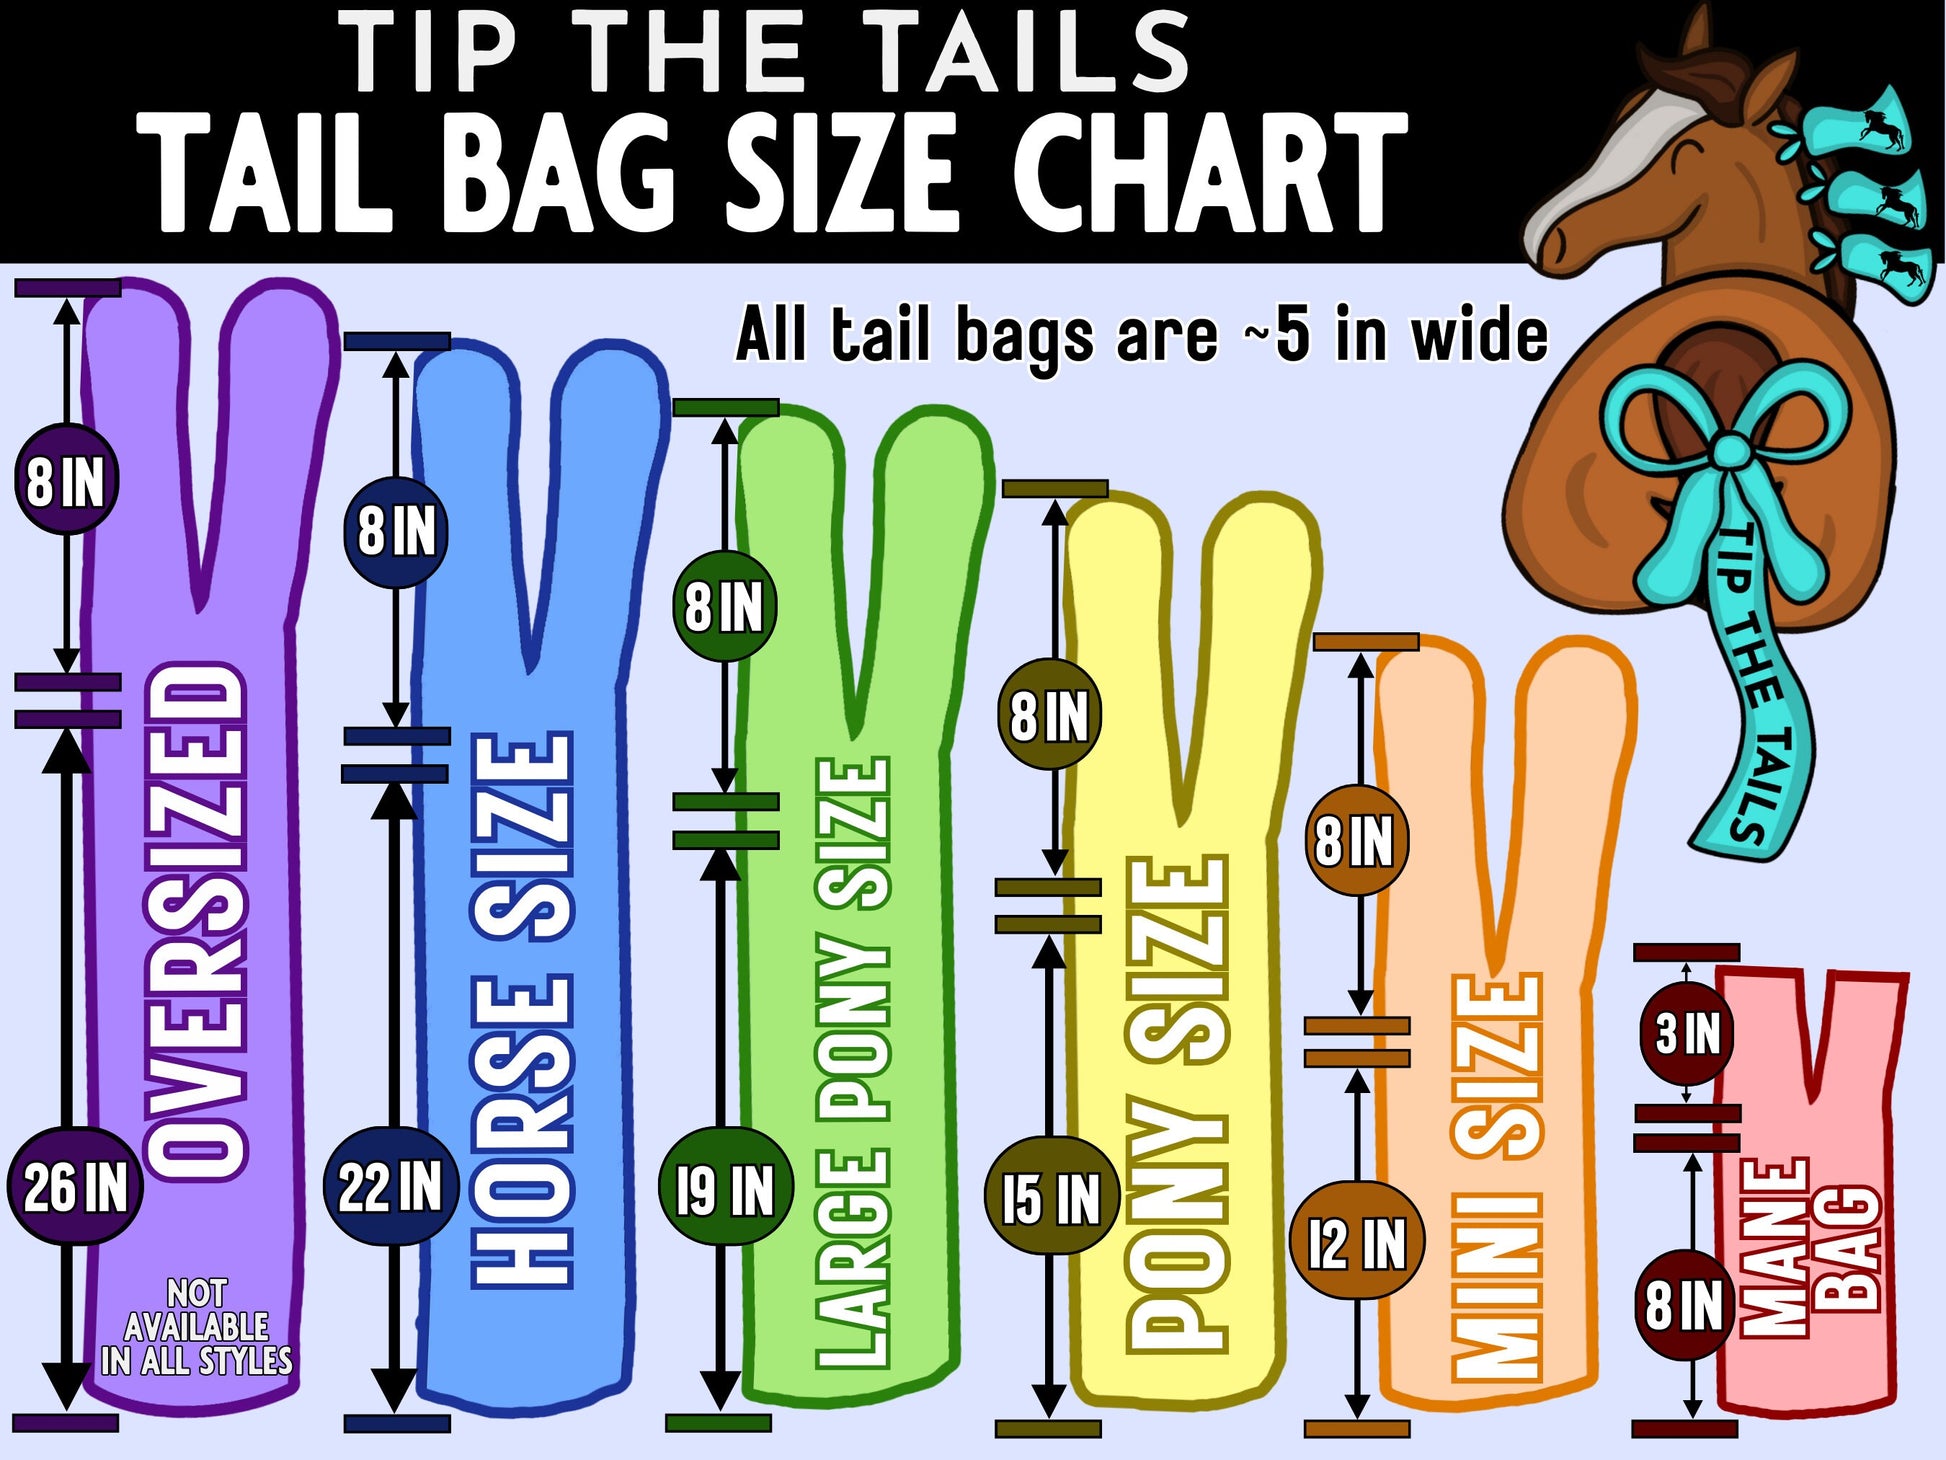 Simmer Down & Saddle Up (English) Equine Tail Bag-Tip The Tails